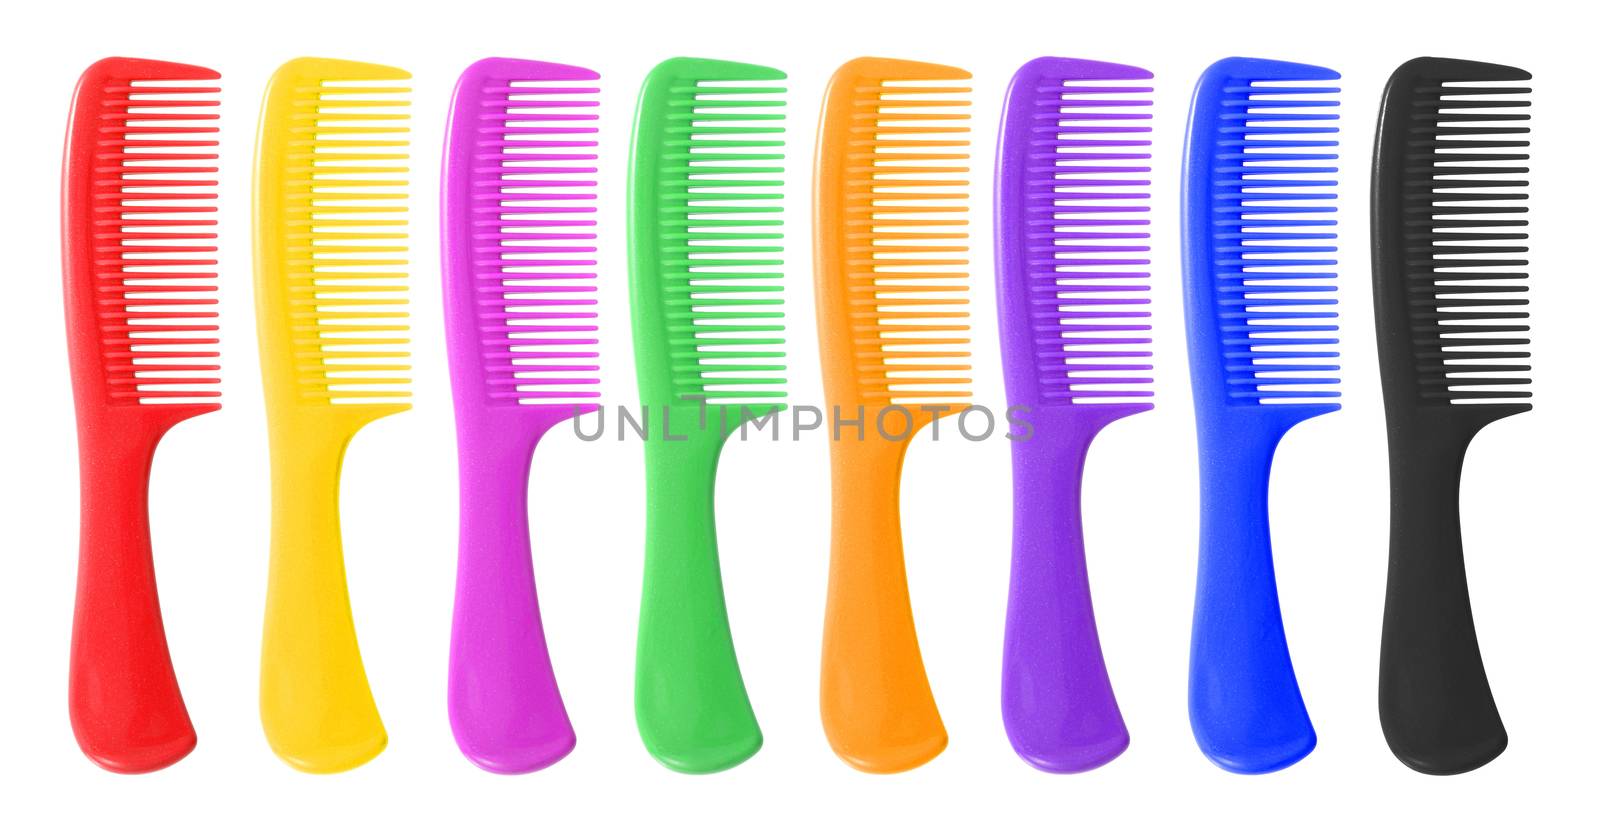 Colored hair combs with glitter finish isolated on a white background